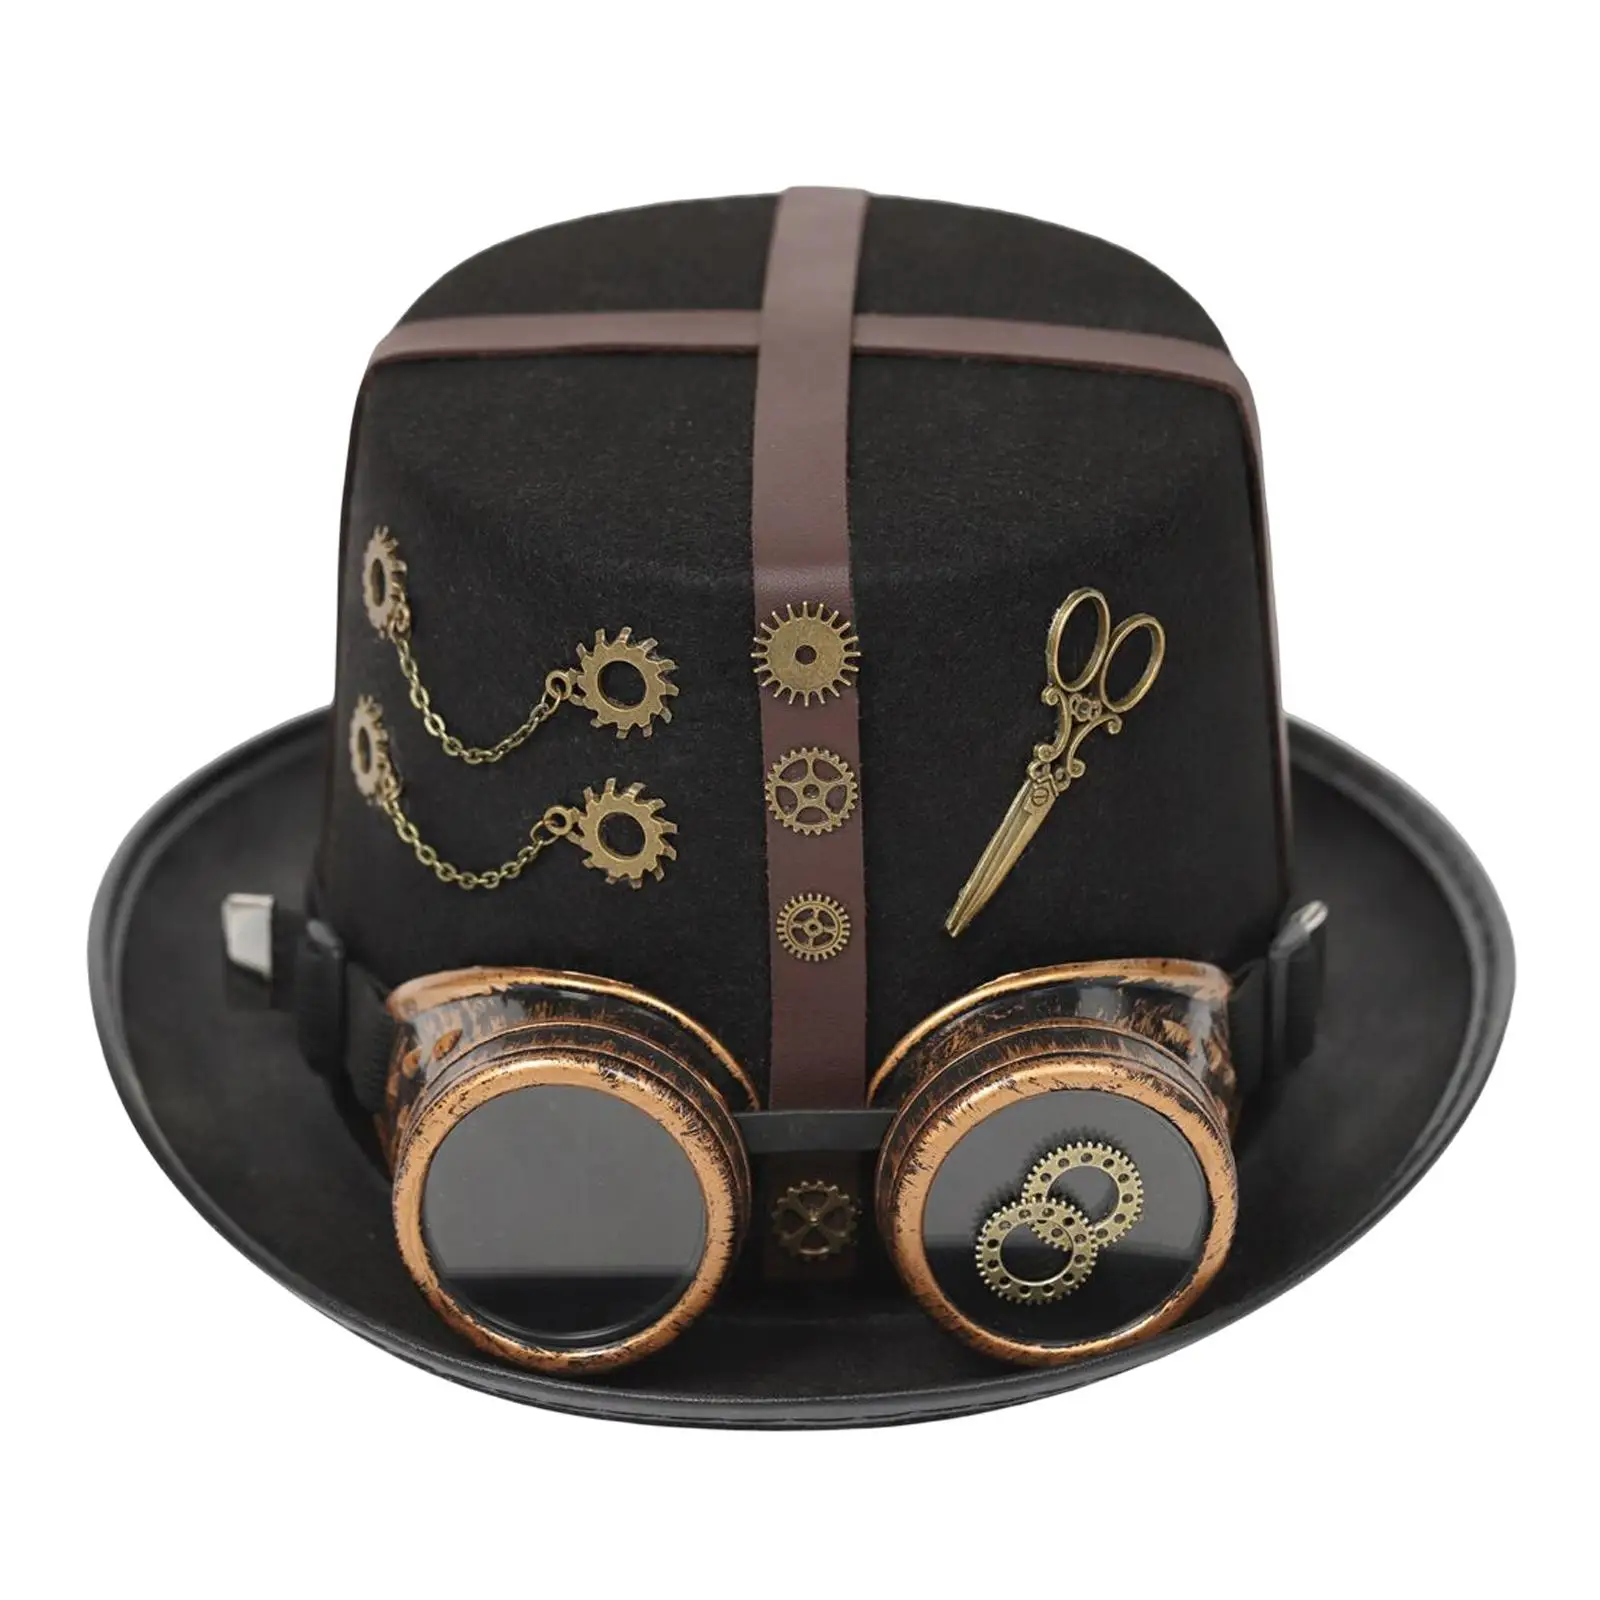 Retro Style Steampunk Top Hat Head Wear Wide Brim Costume Accessories Dance Hat for Cosplay Magician Decoration Holiday Adult